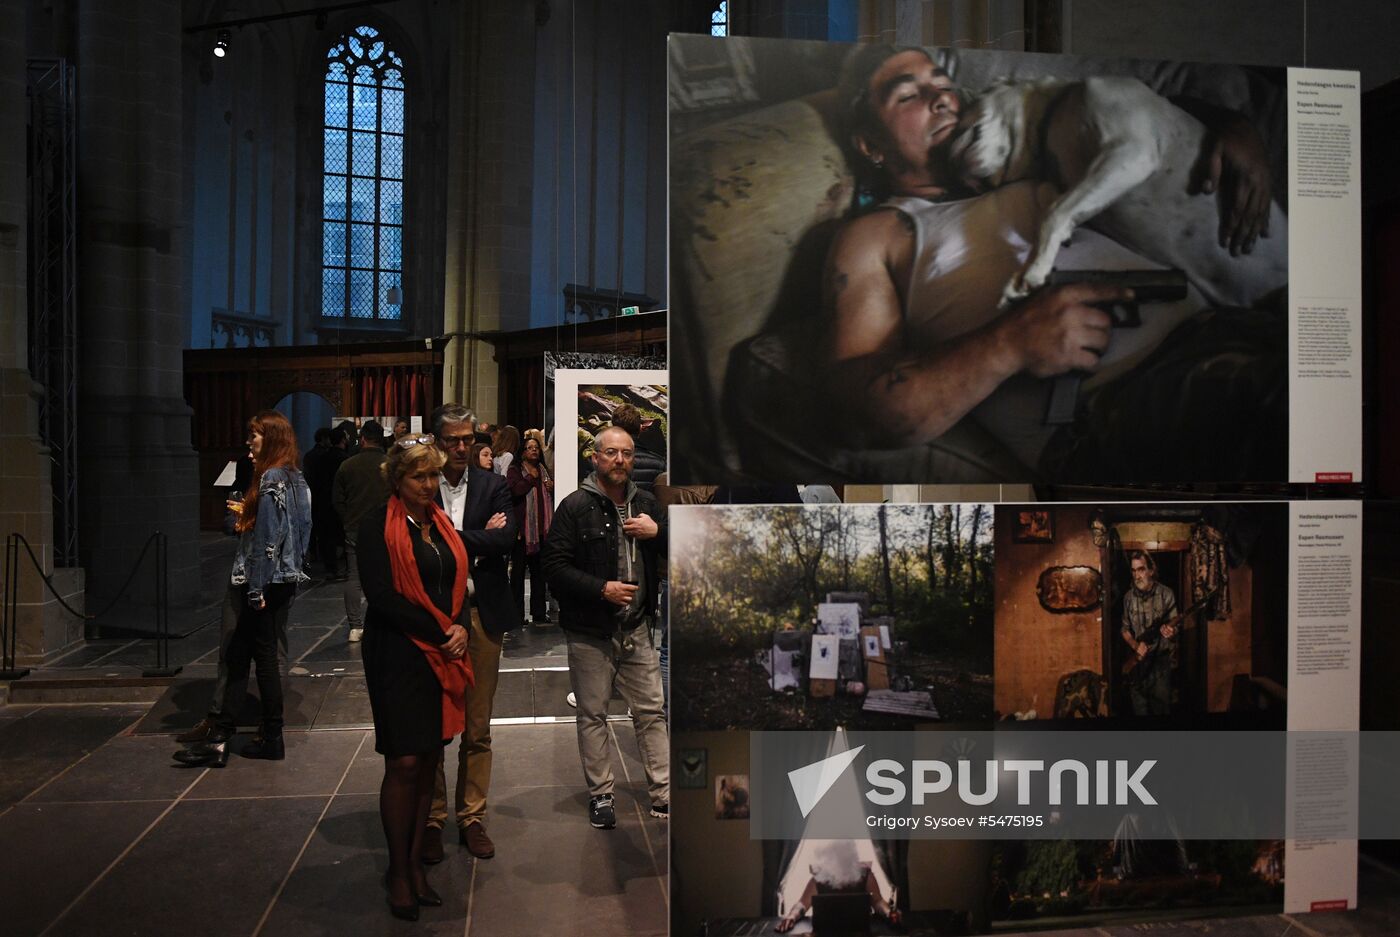 Exhibition of WPP winners opens in Amsterdam